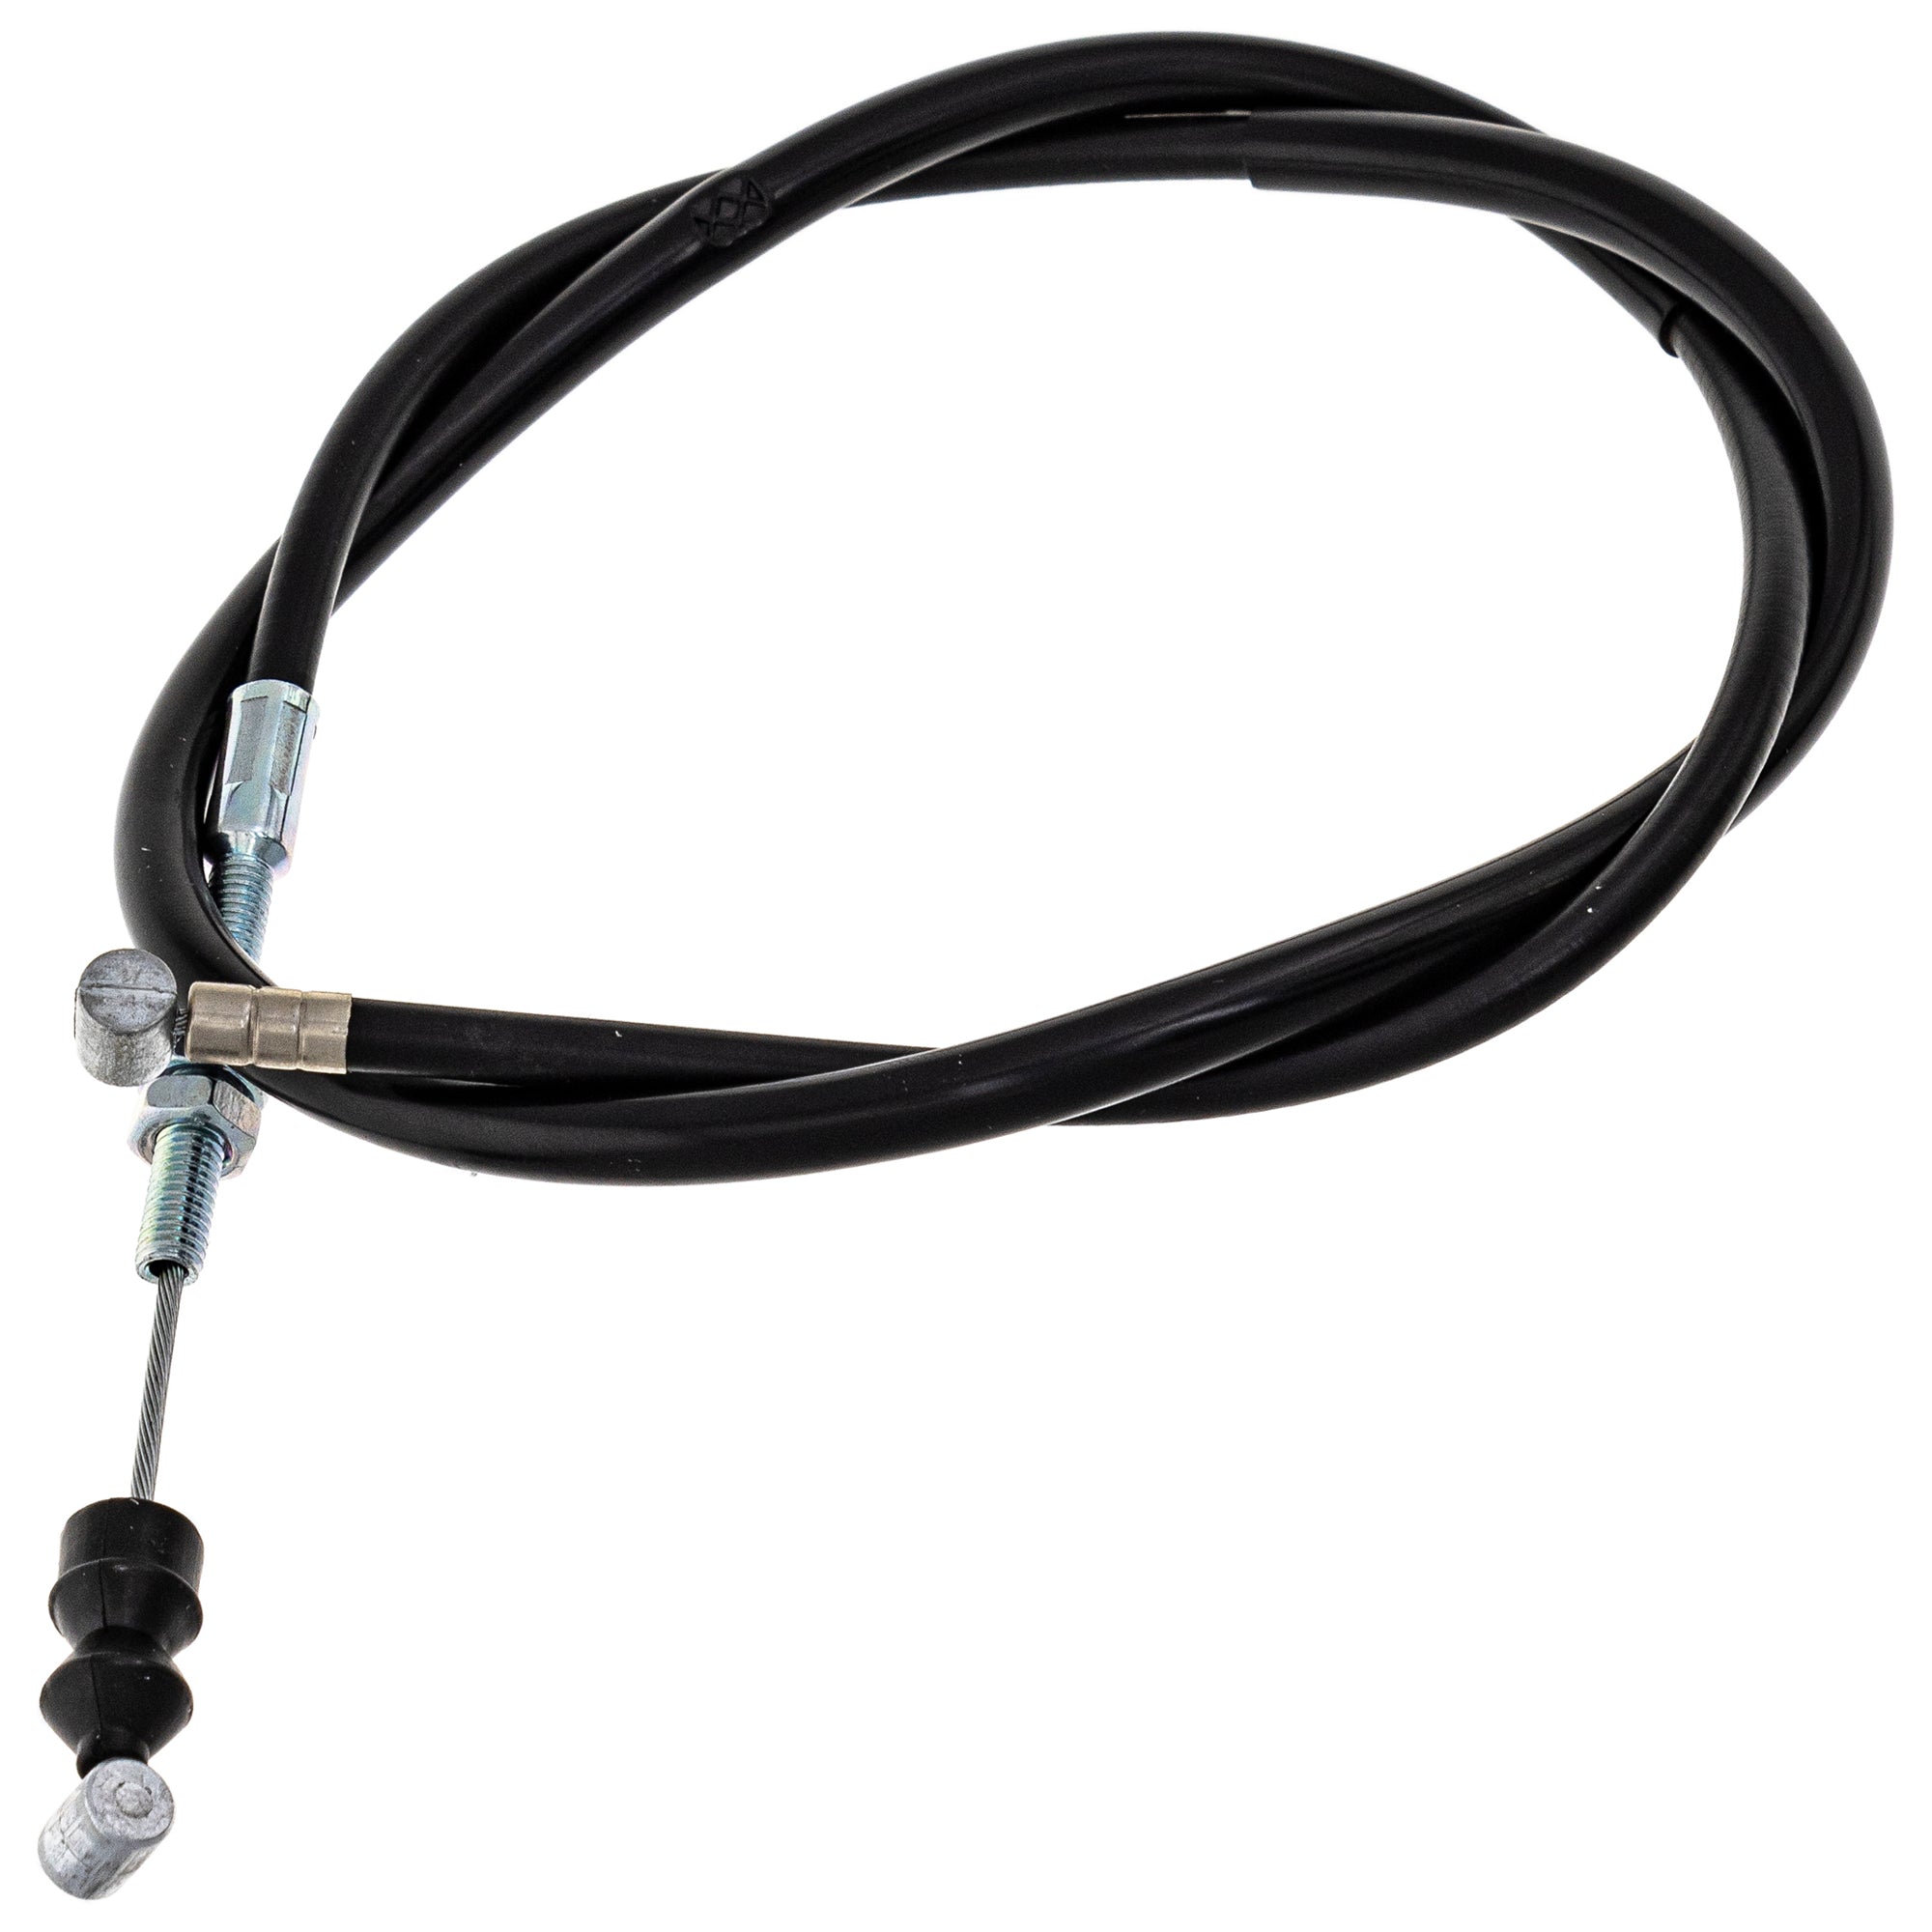 Front Brake Cable For Suzuki K5400-51214